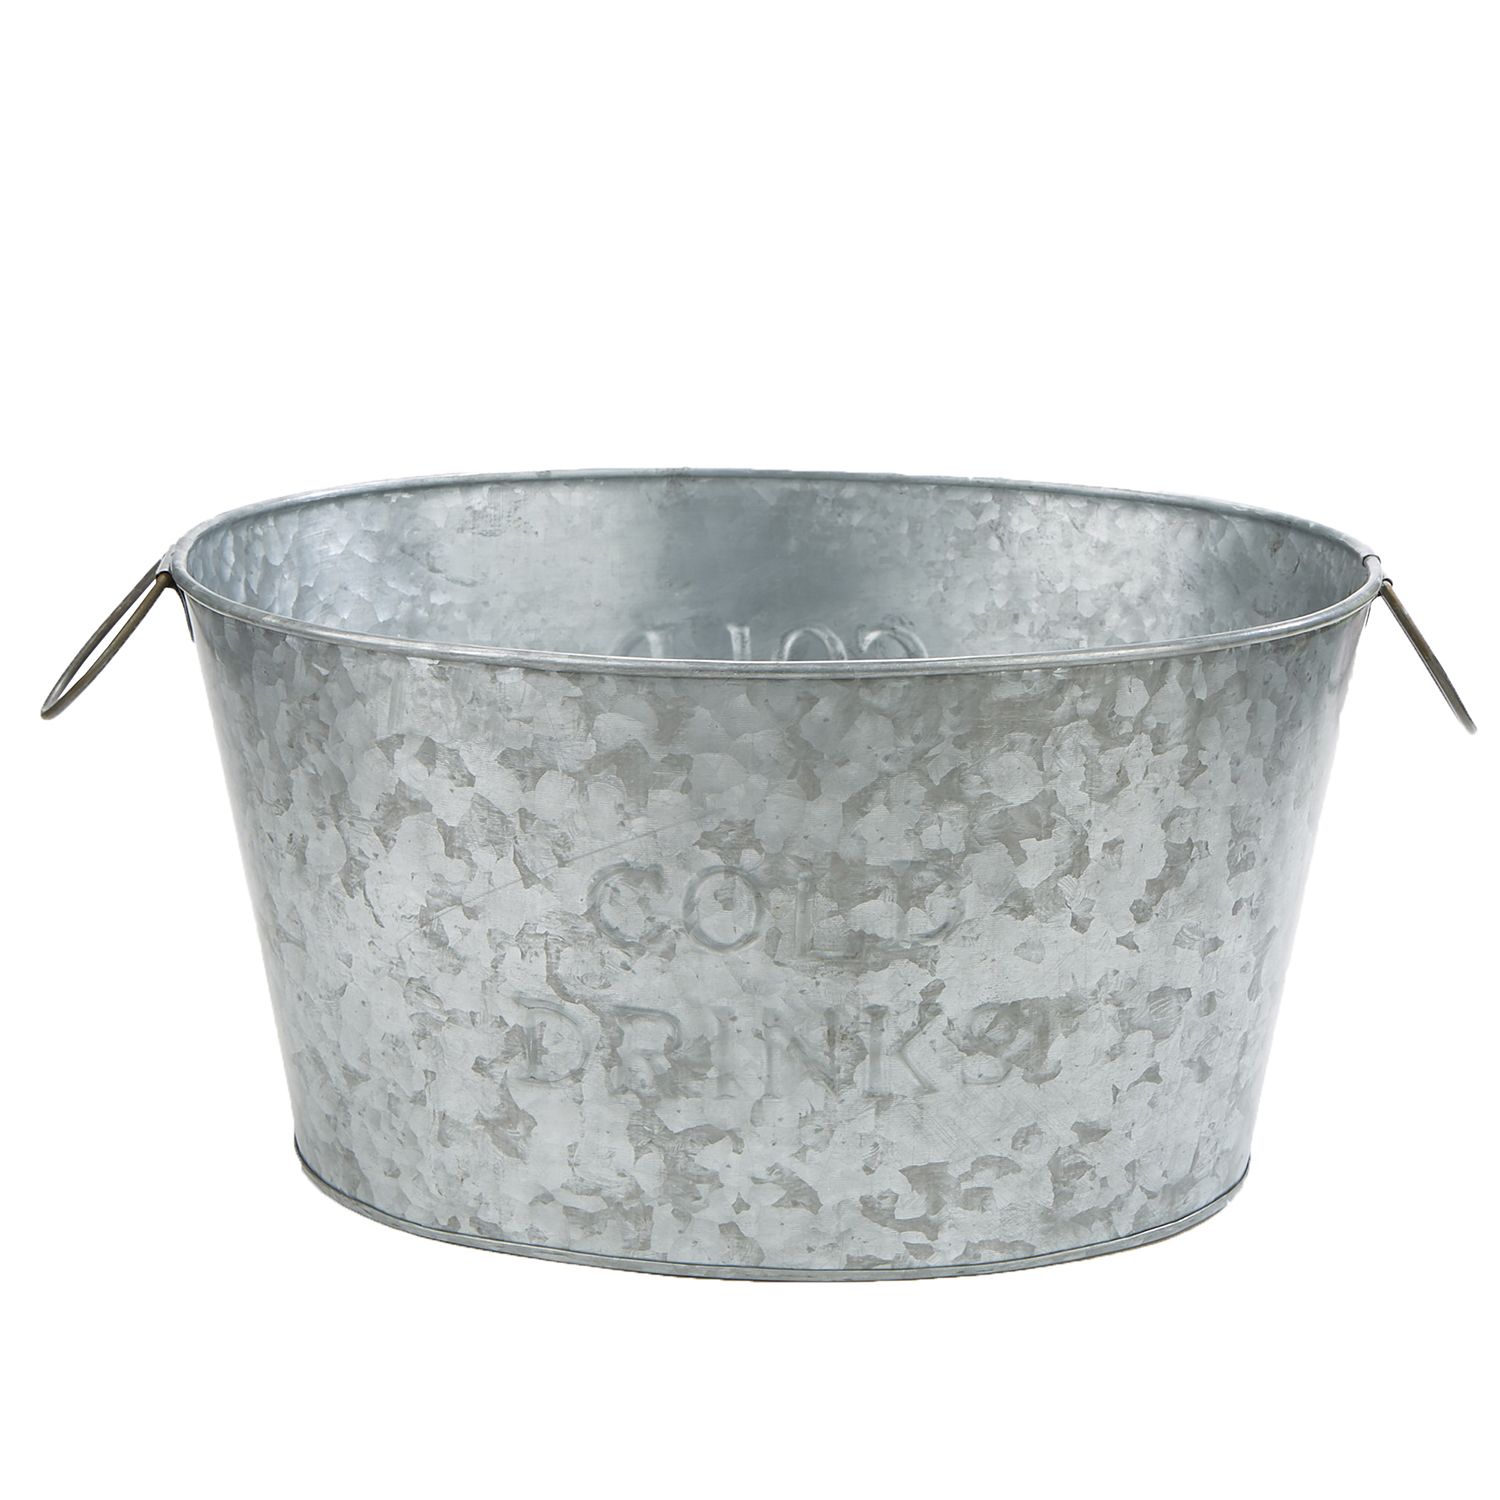 12 Pack Galvanized Metal Buckets with Handles for Party Decorations, Small  Tin Pails (4.7 In)